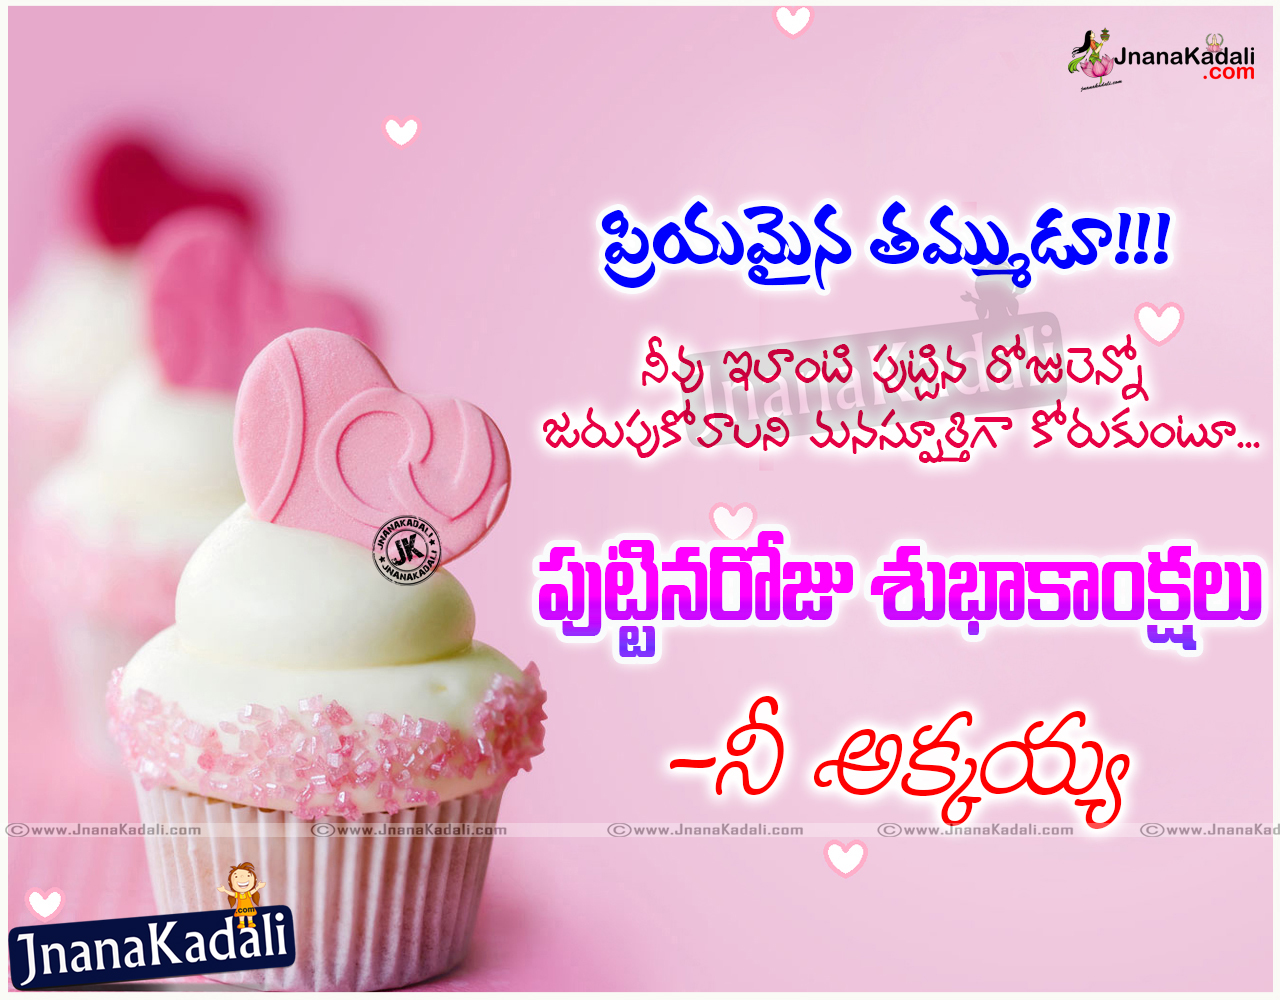 Telugu Best Birthday Quotes and Wishes Greetings Cards for Brother ...